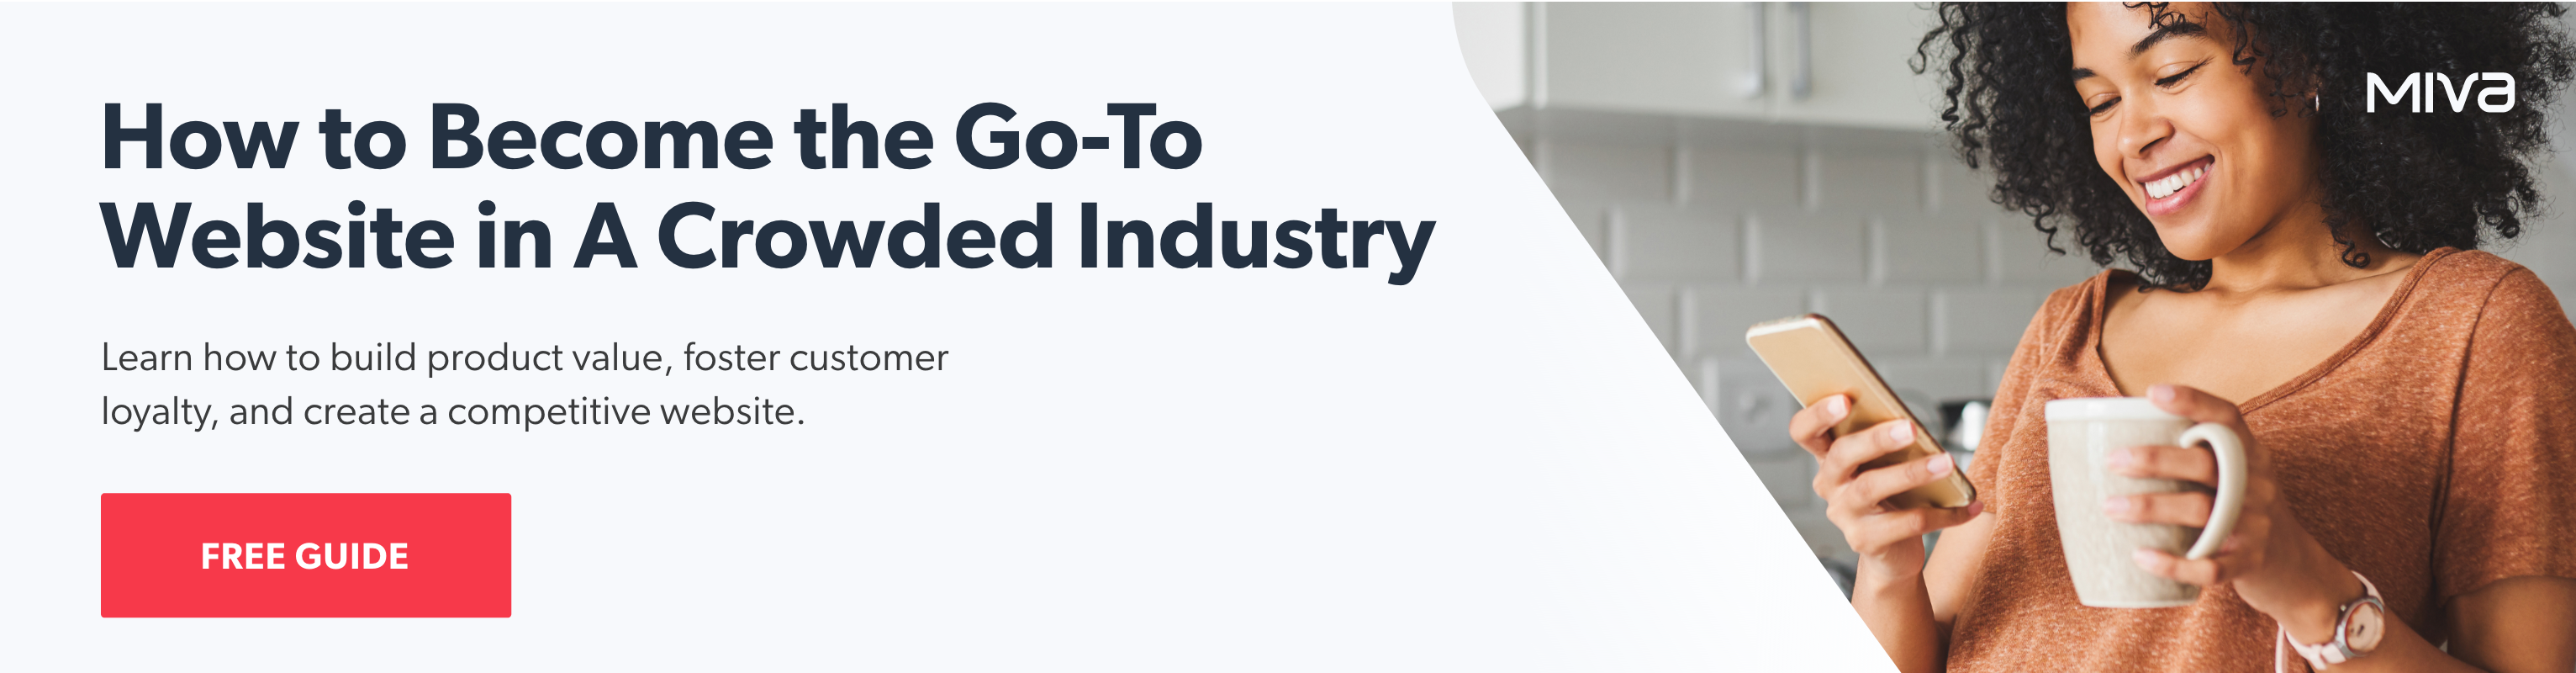 Free Guide | How to Become the Go-To Website in a Crowded Industry